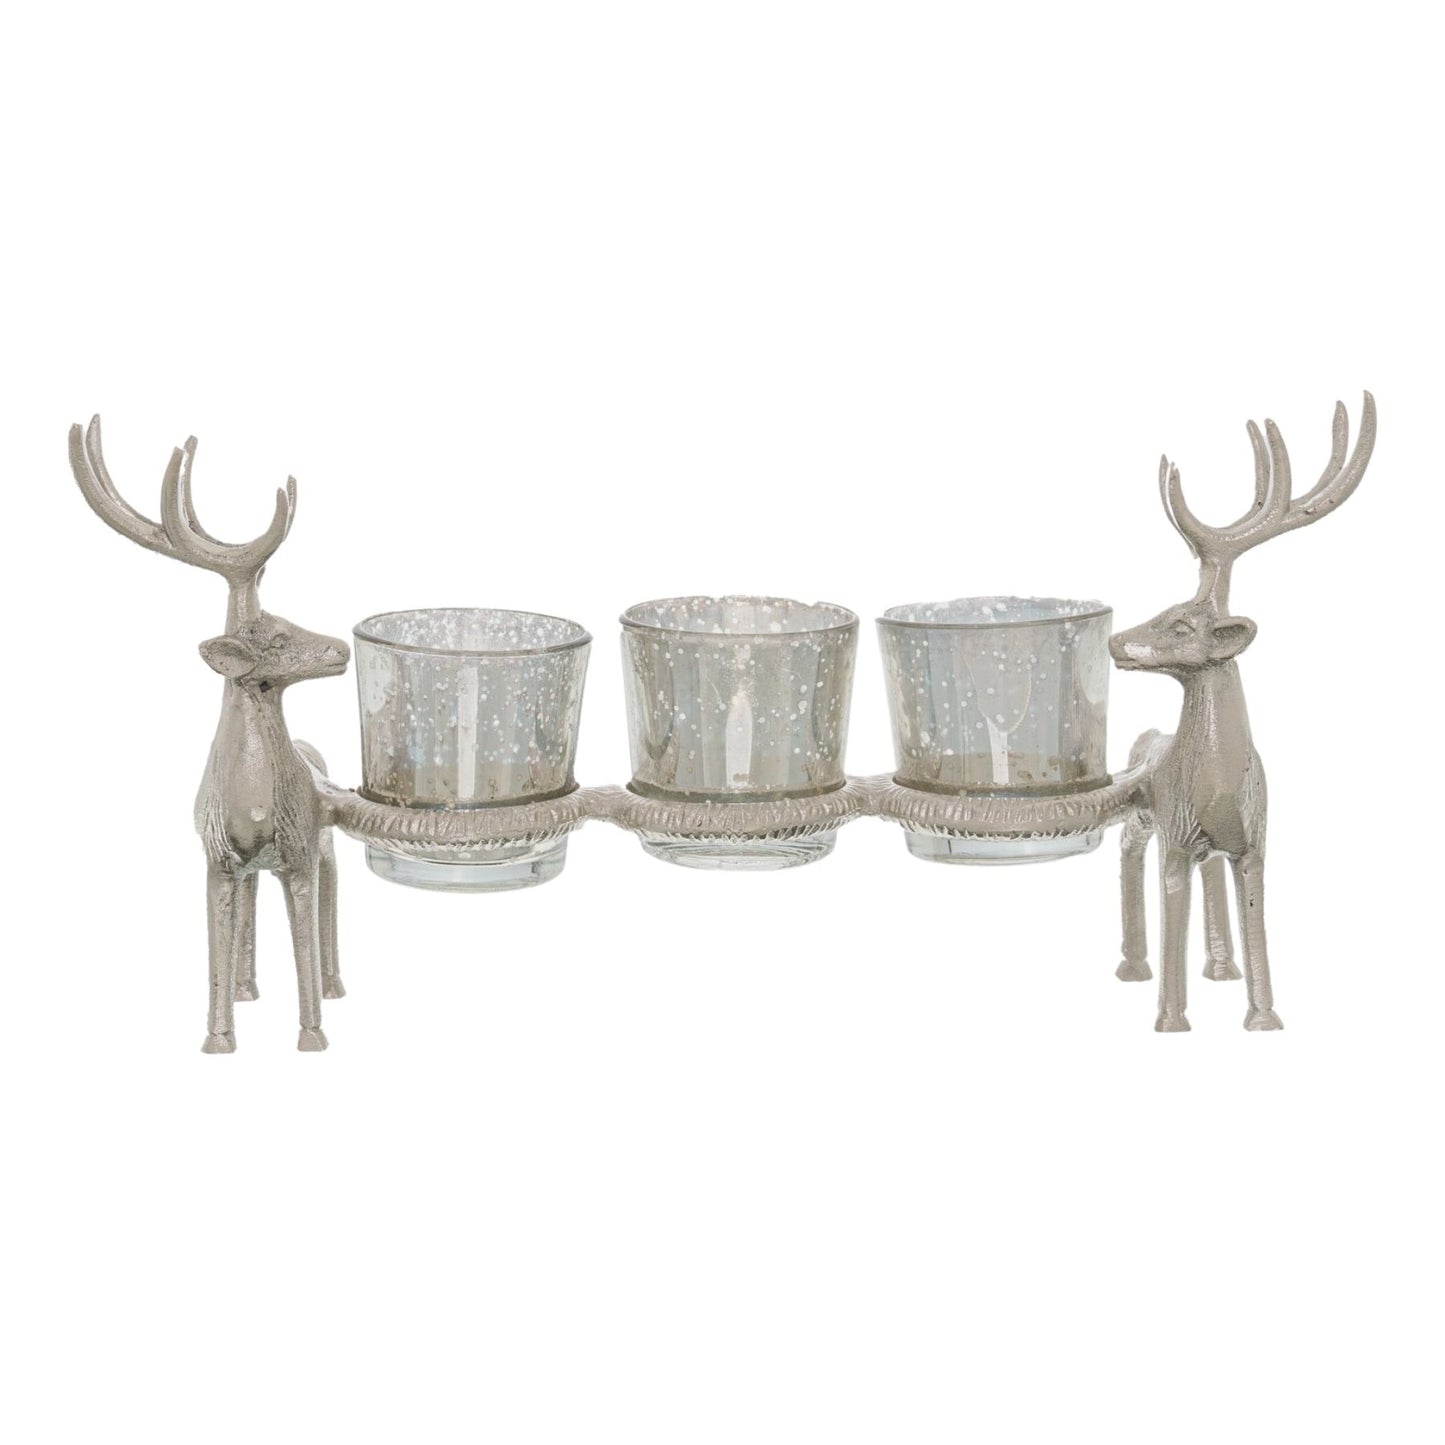 Silver Stag Triple Tealight Holders - Ashton and Finch